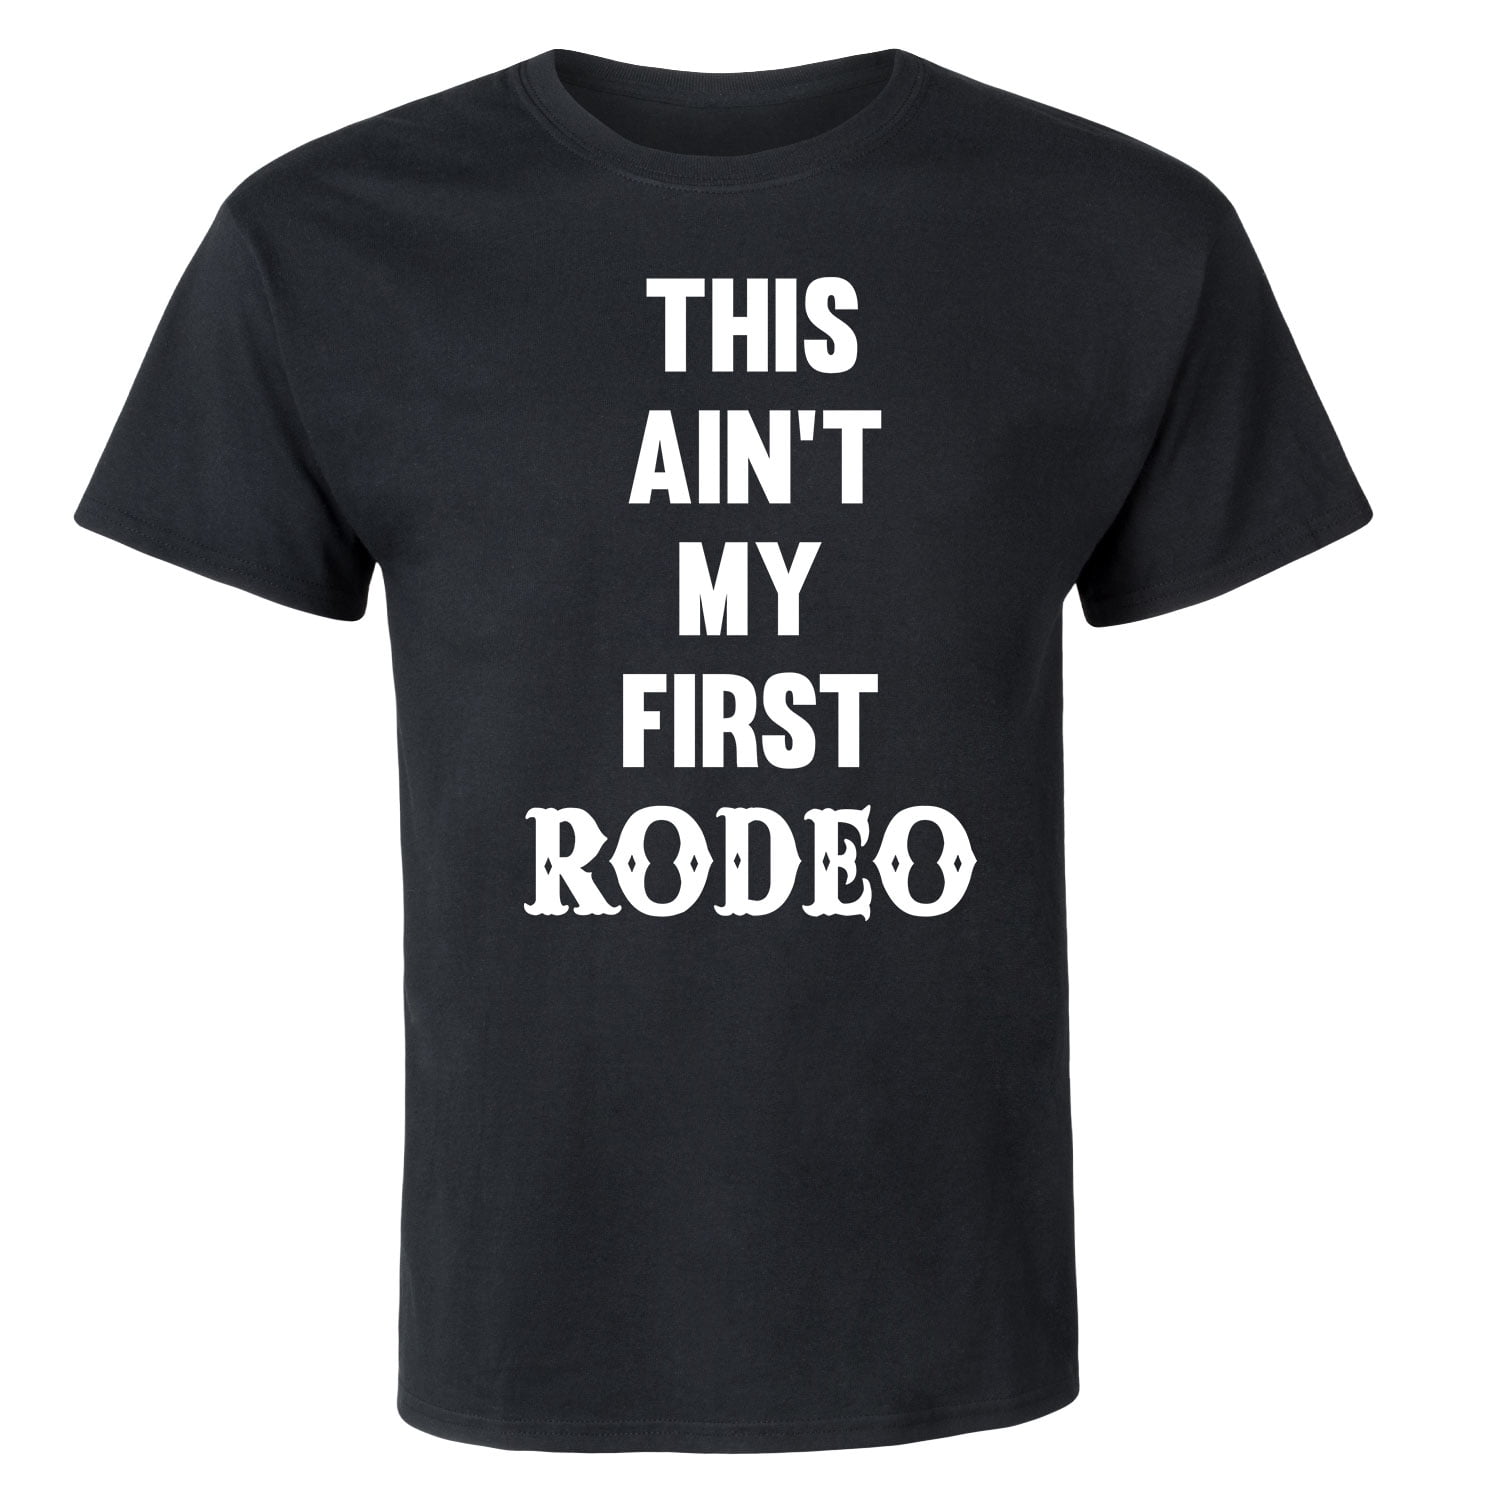 This Actually is My First Rodeo Funny Cowboy Tee Shirt Short-Sleeve Unisex T-Shirt